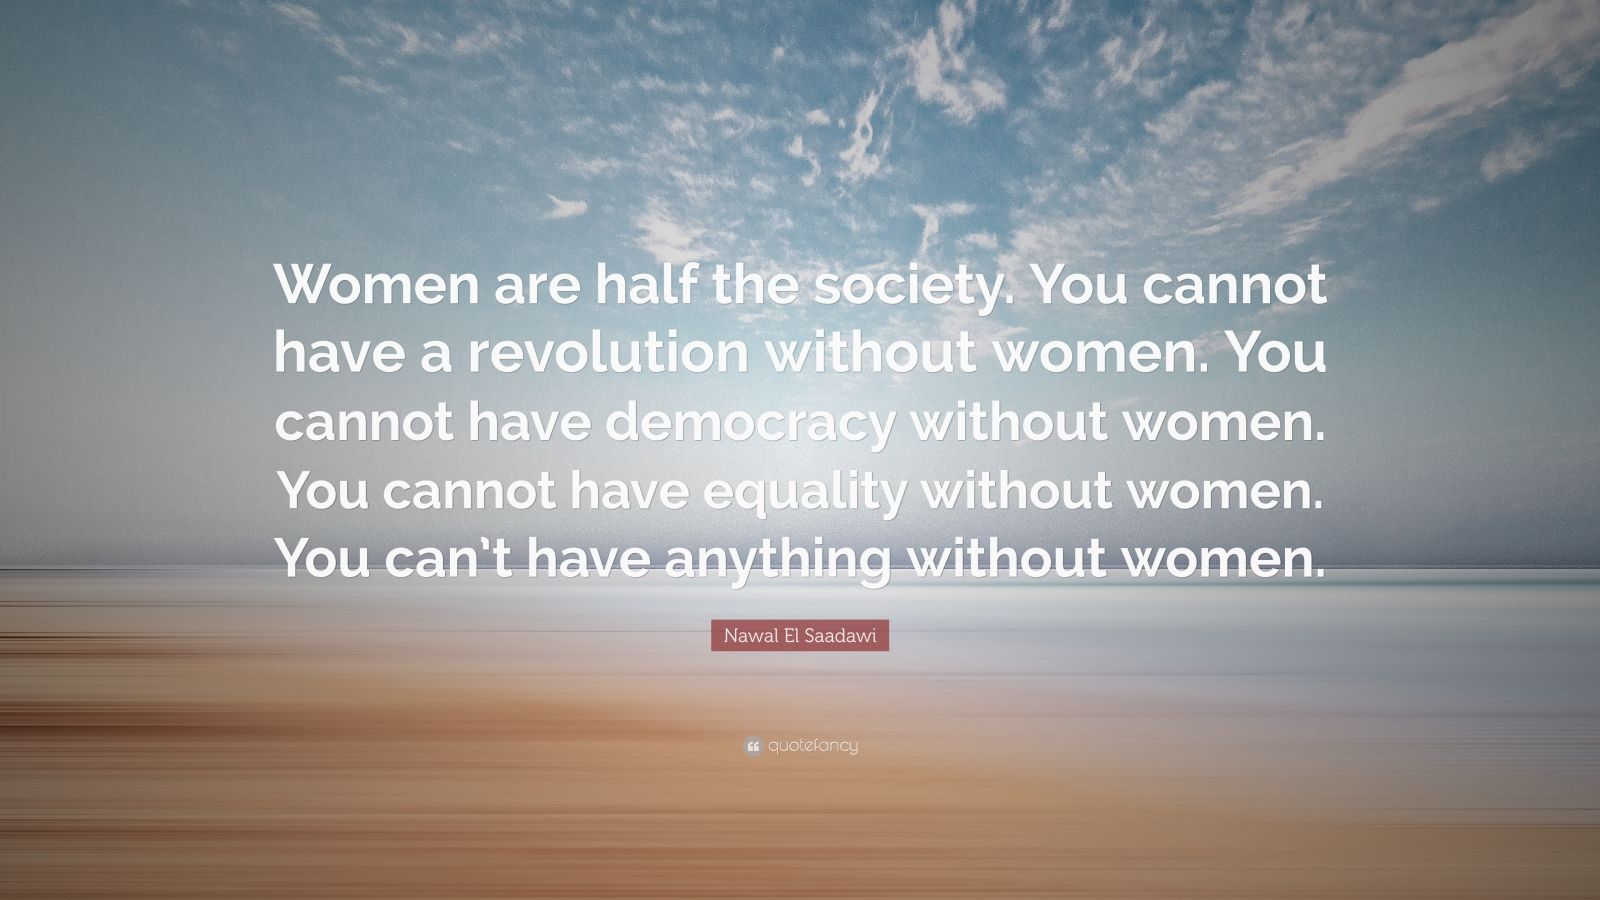 Nawal El Saadawi Quote: "Women are half the society. You ...